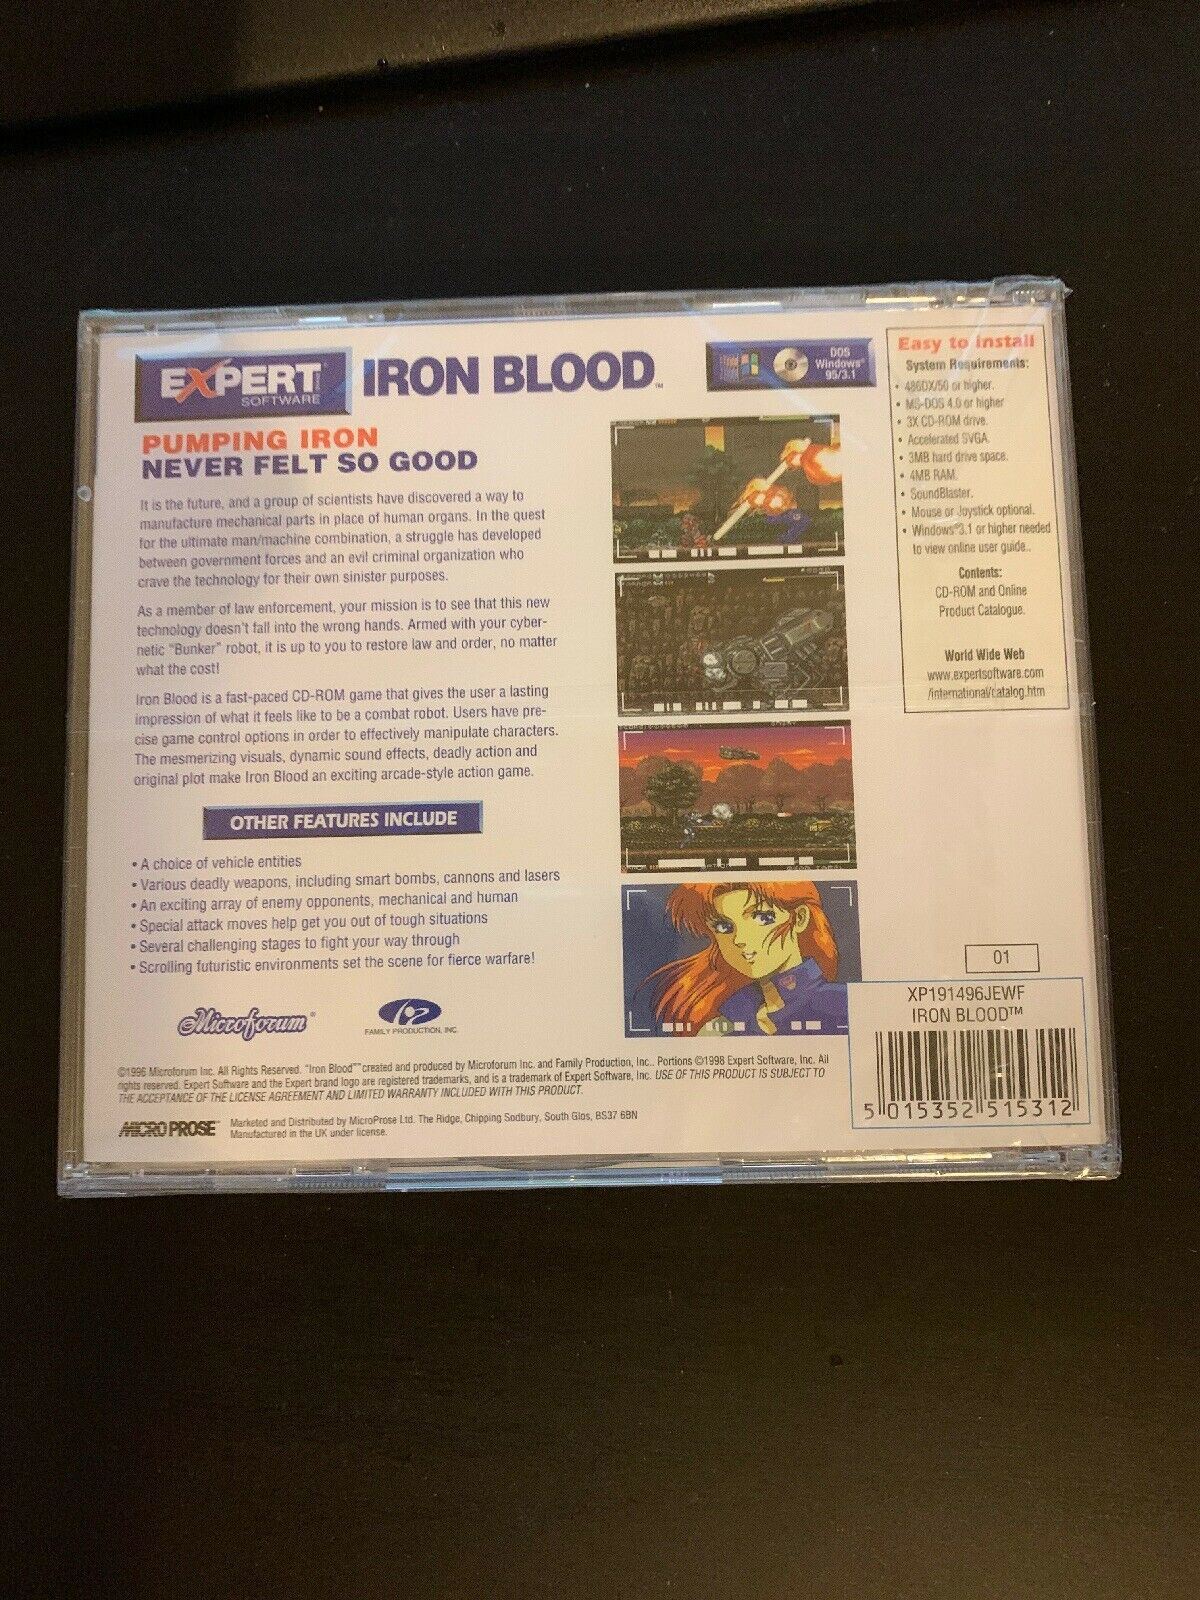 *NEW* Iron Blood (1996) PC CDROM Expert Software Vintage Windows DOS Action Game